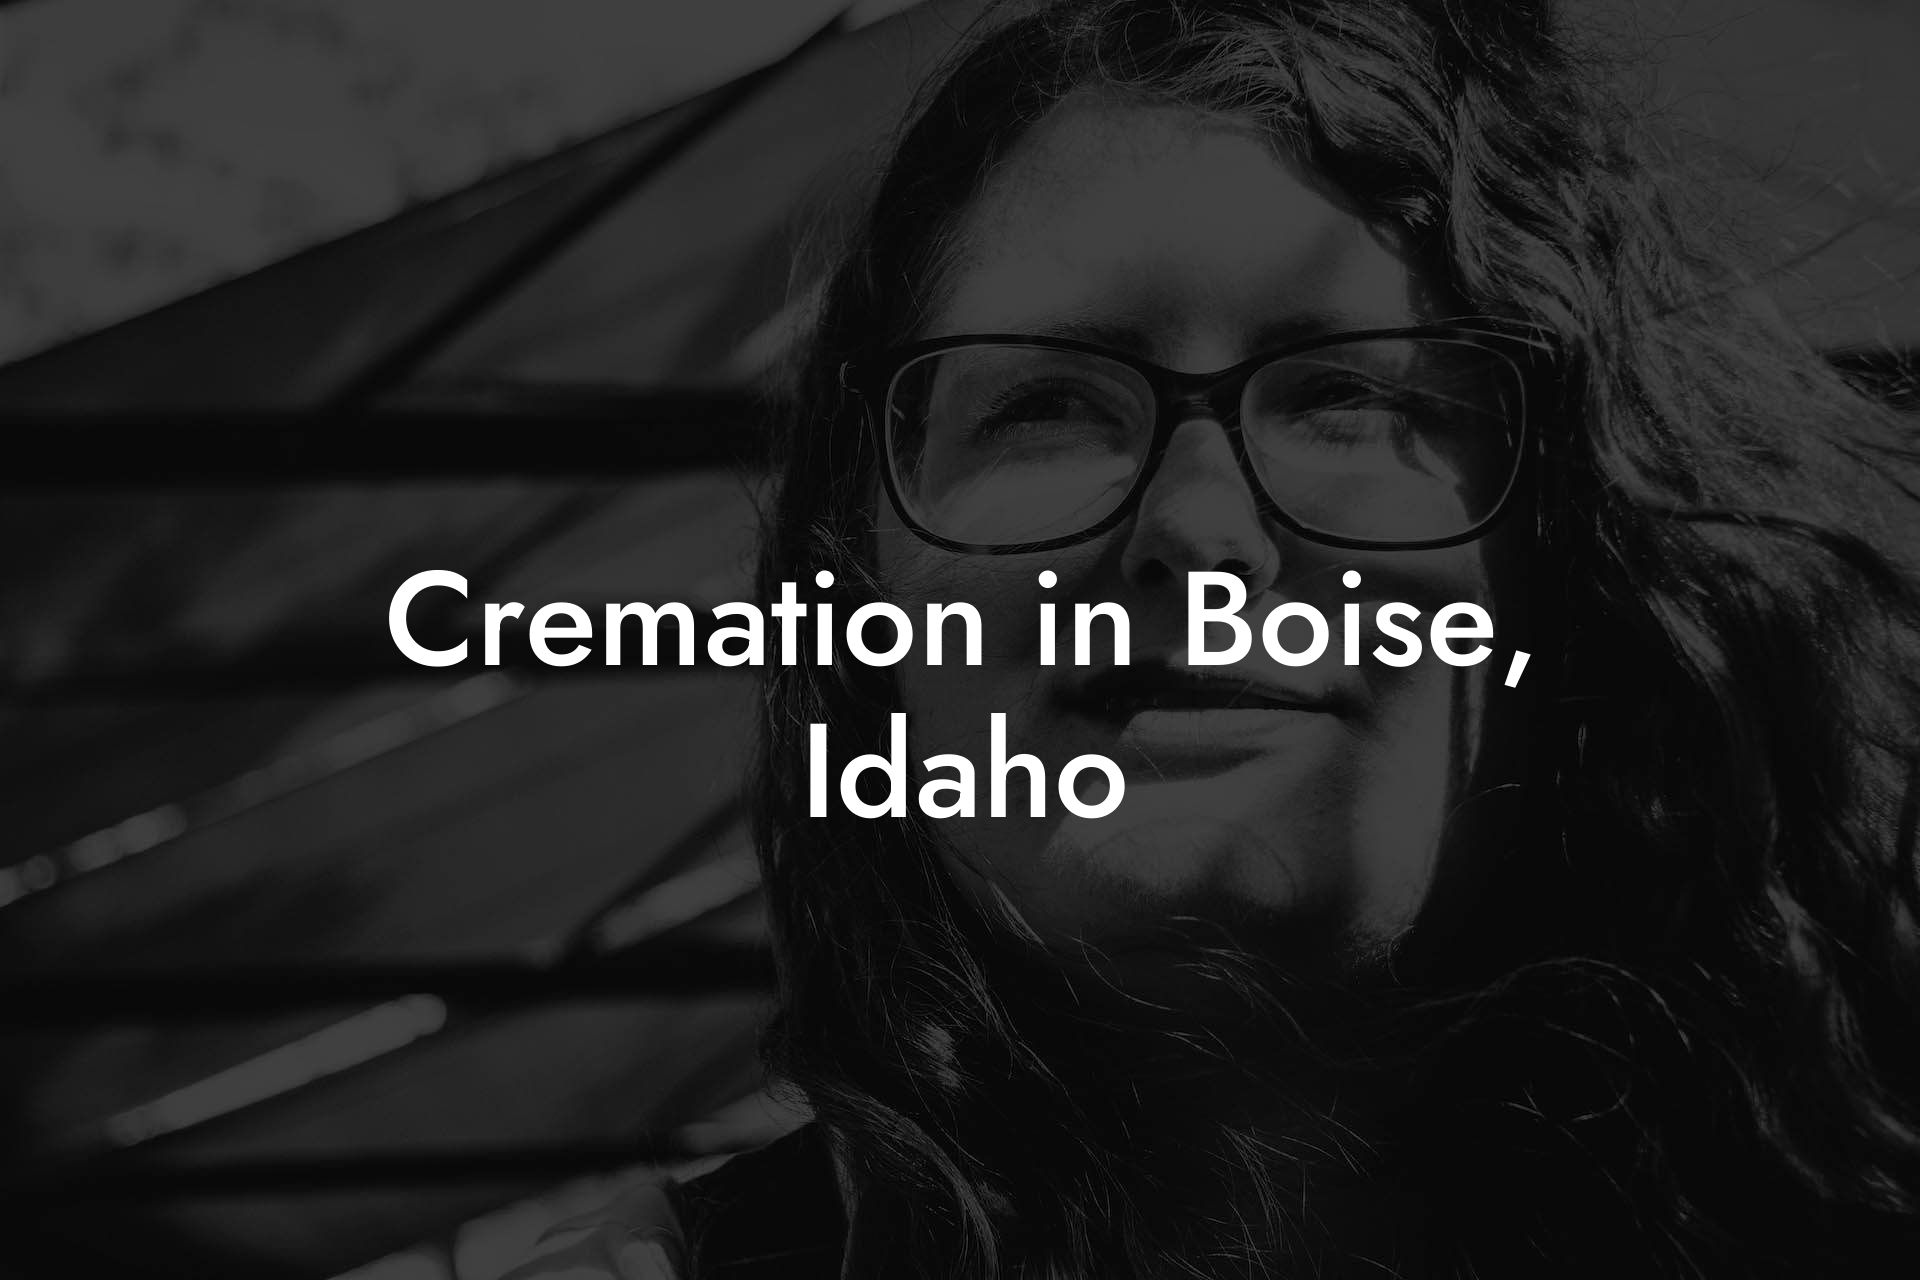 Cremation in Boise, Idaho